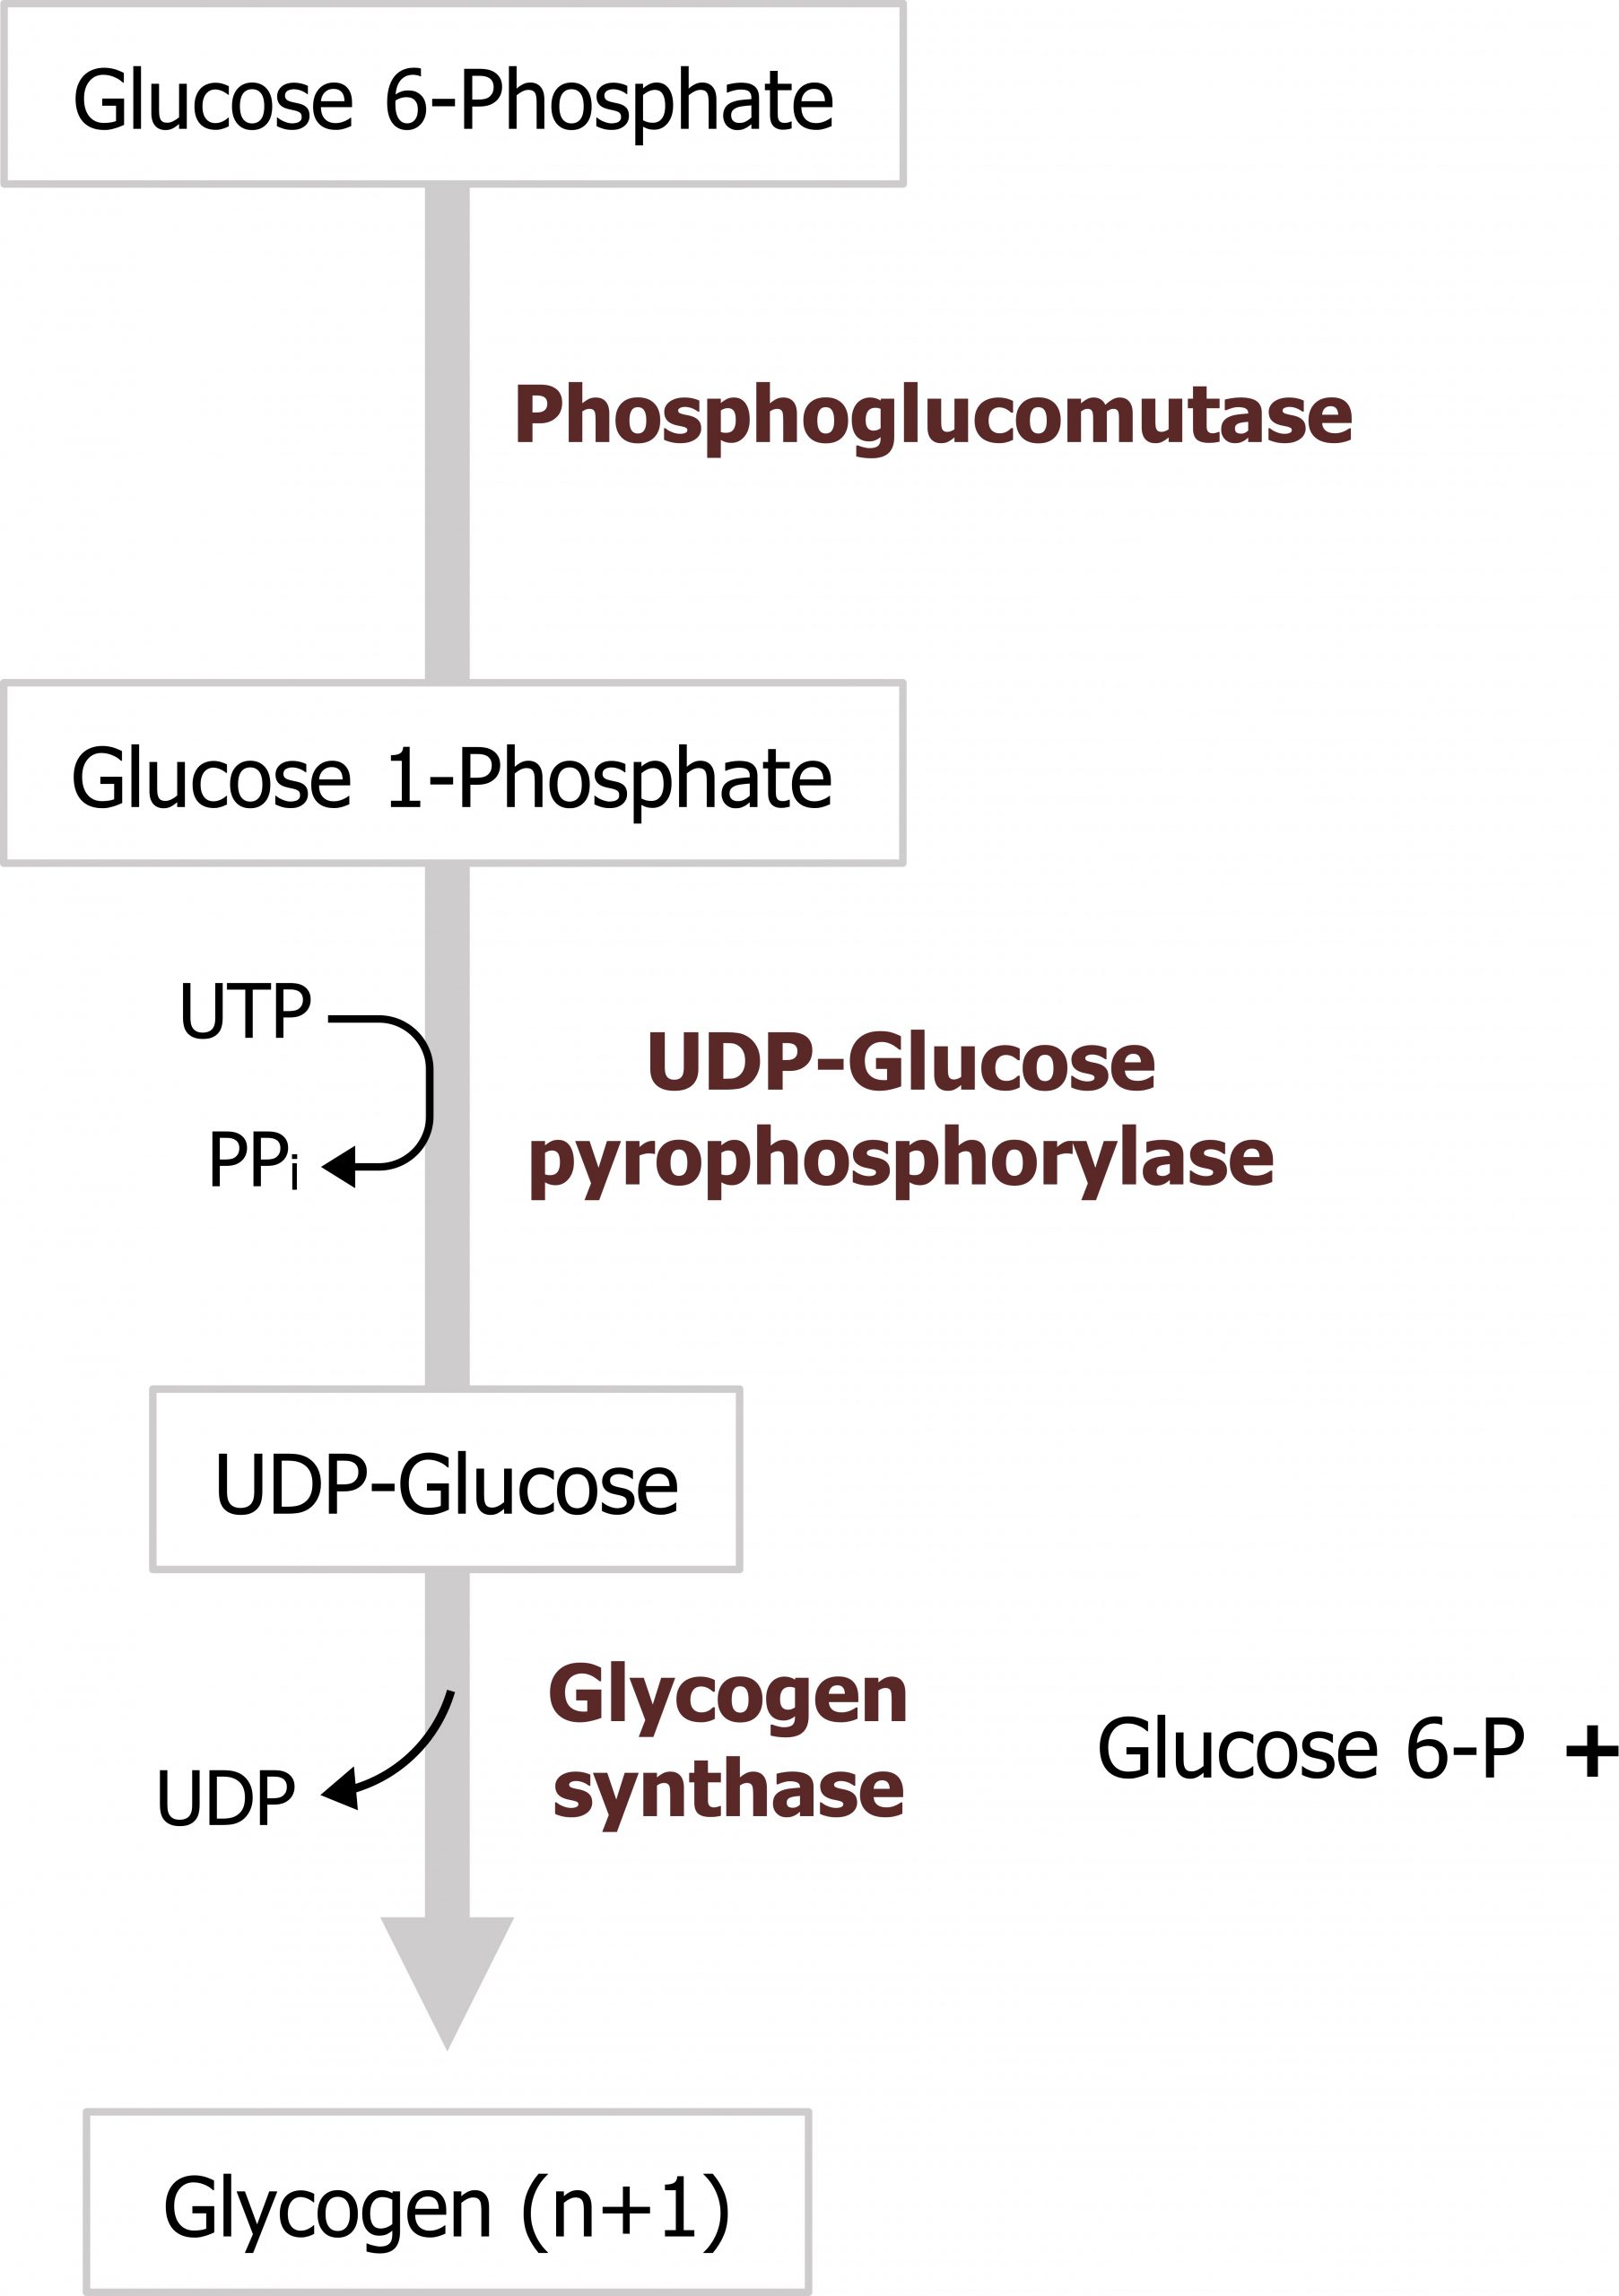 Glucose 6-Phosphate arrow with enzyme phosphoglucomutase to glucose 1-phosphate arrow with UTP arrow PPi and enzyme UDP-glucose pyrophosphorylase to UDP-glucose arrow with loss of UDP and enzyme glycogen synthase to glycogen (n+1). Glucose 6-P excites glycogen synthase.